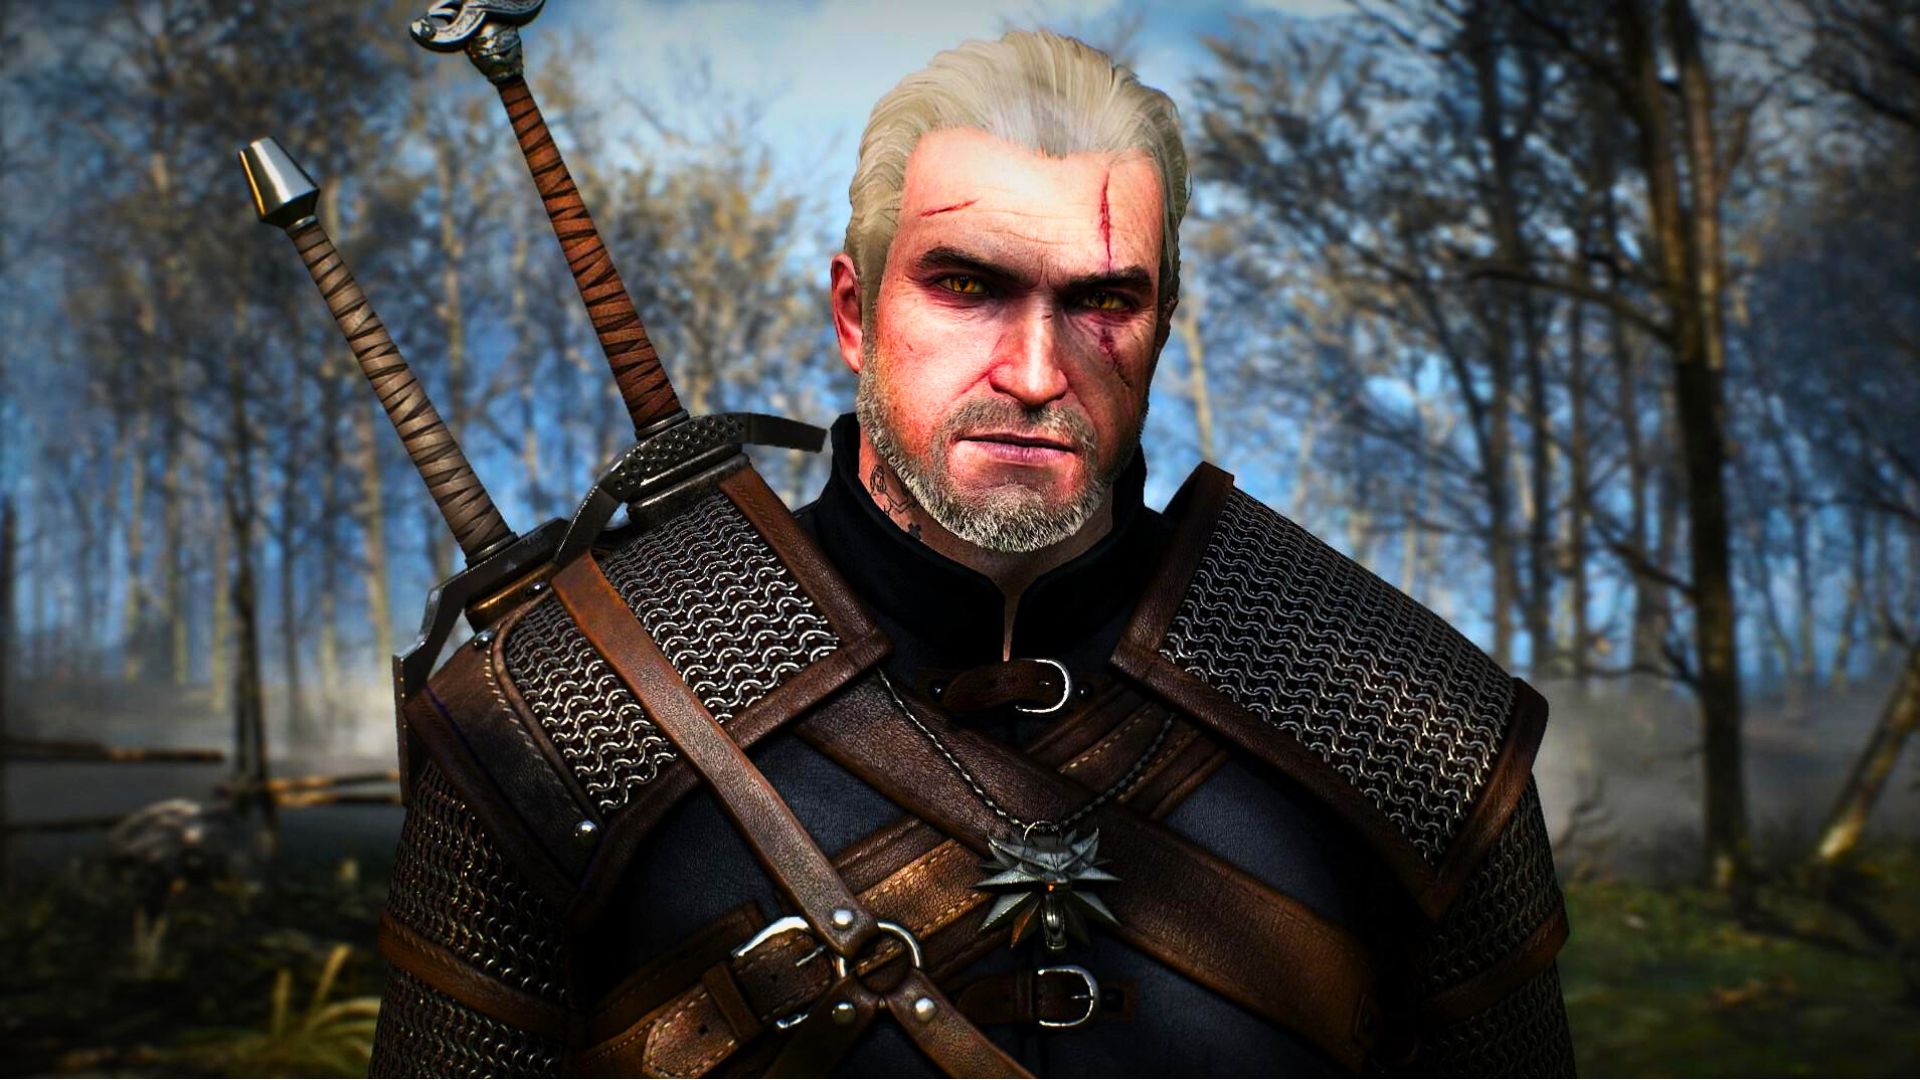 Geralt in The Witcher 3